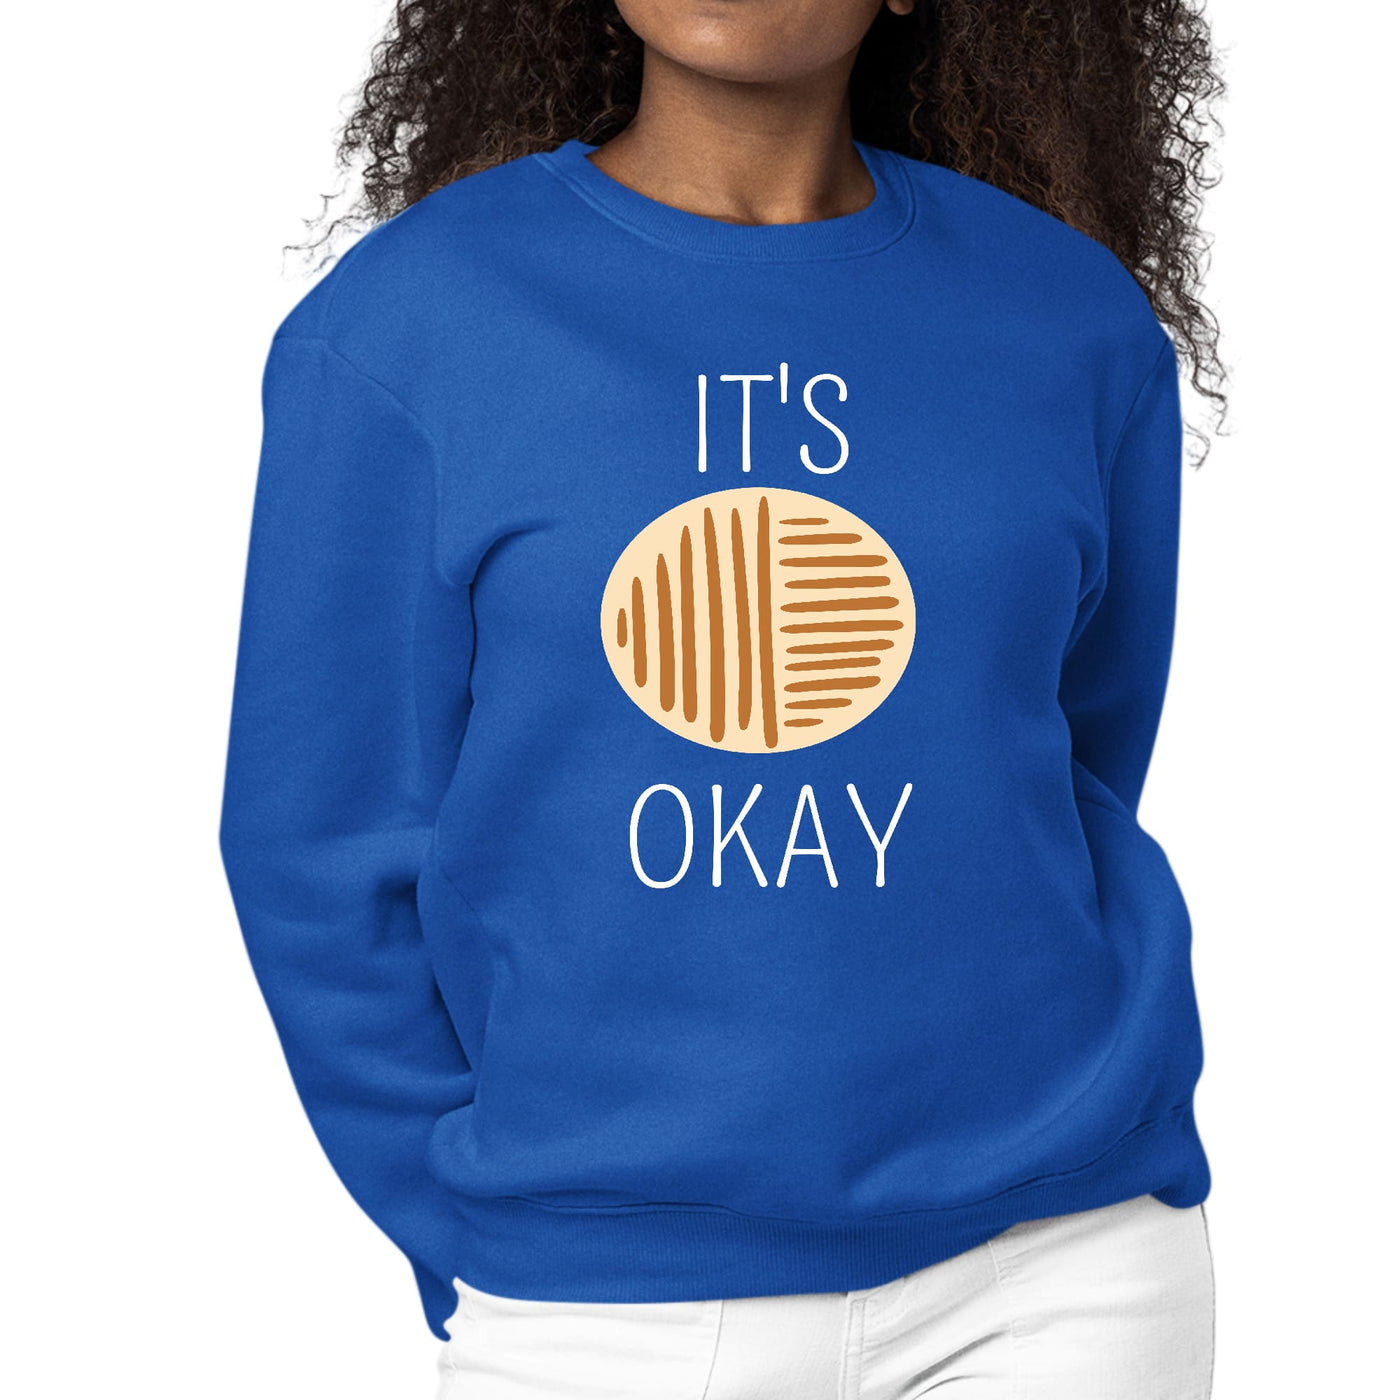 Womens Graphic Sweatshirt Say It Soul Its Okay White And Brown Line